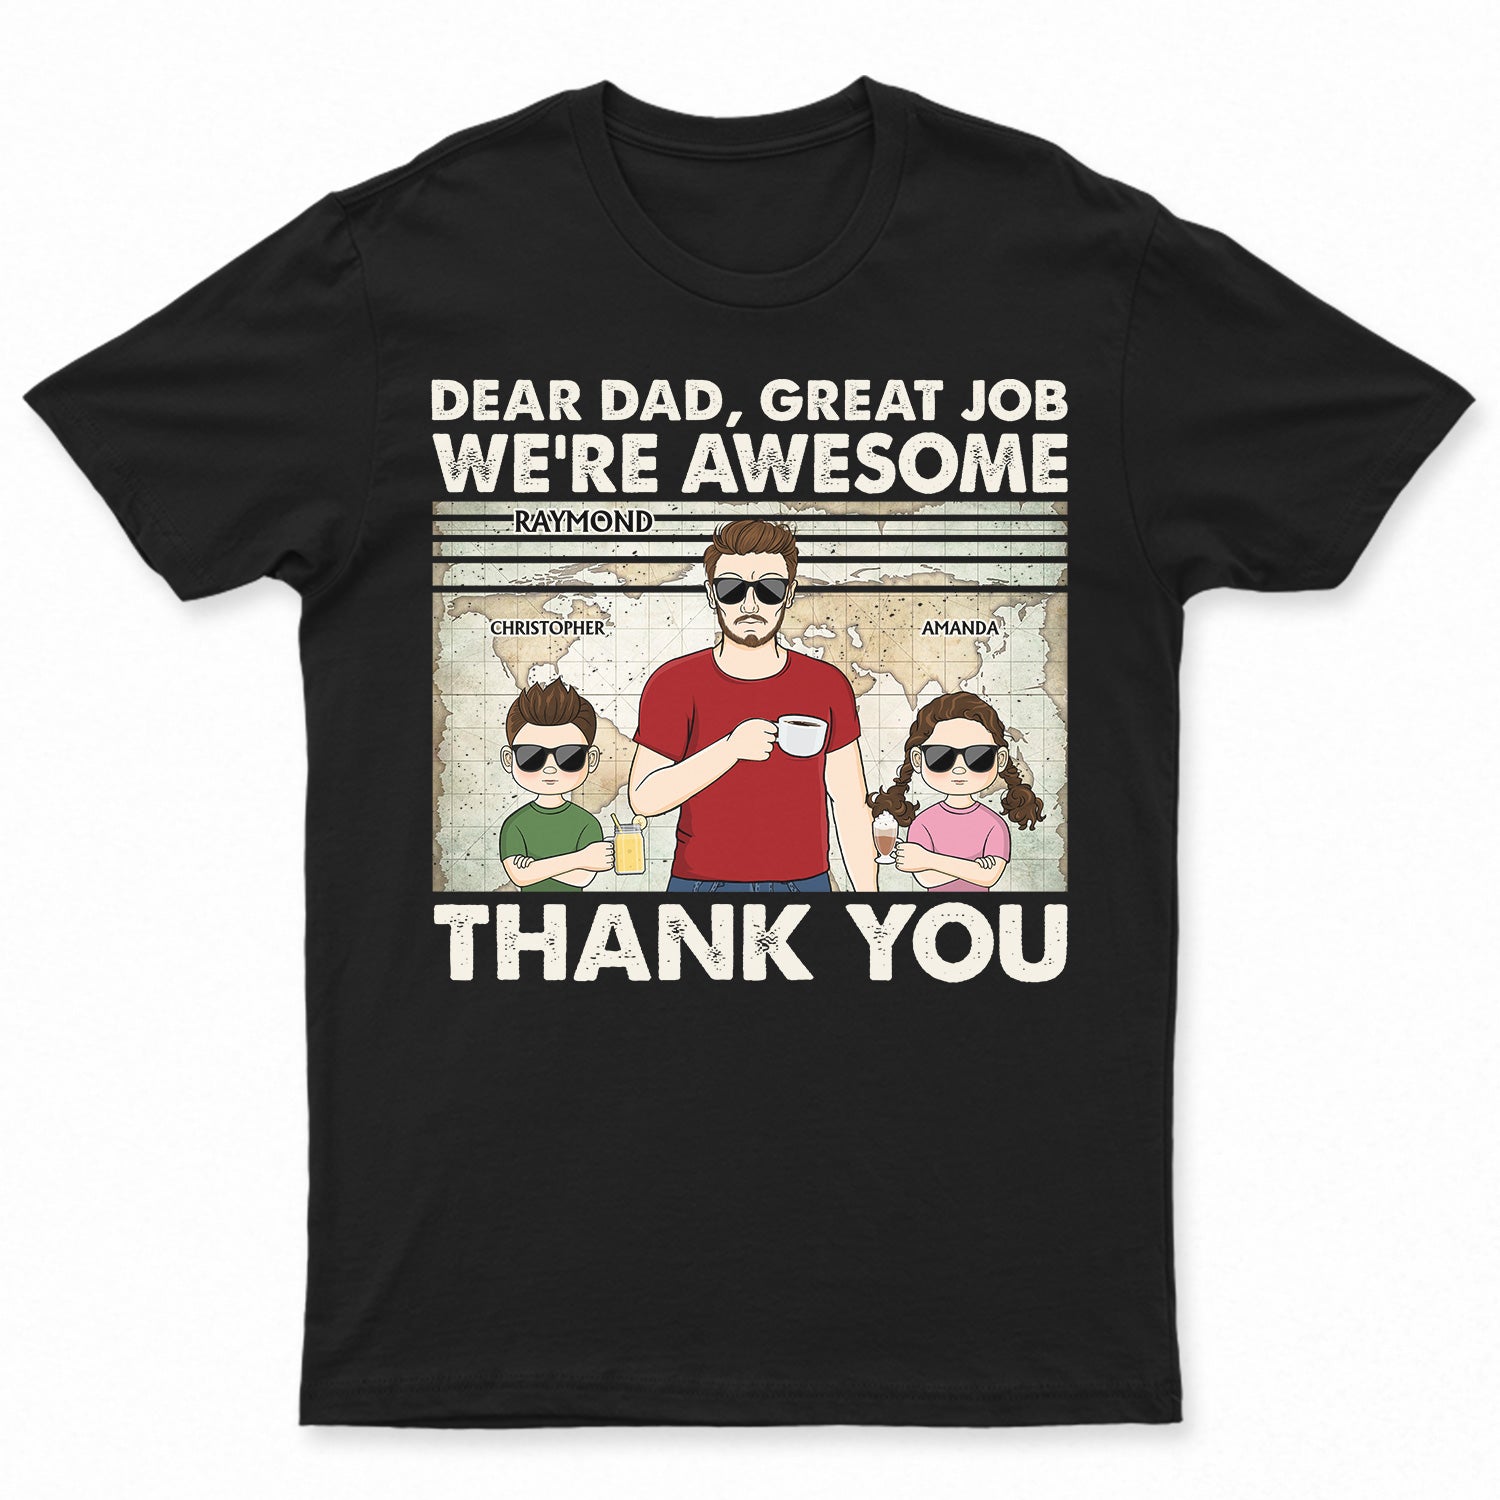 Dear Dad Great Job We're Awesome Thank You Map Young - Birthday, Loving Gift For Dad, Father, Papa, Grandpa, Grandfather - Personalized Custom T Shirt